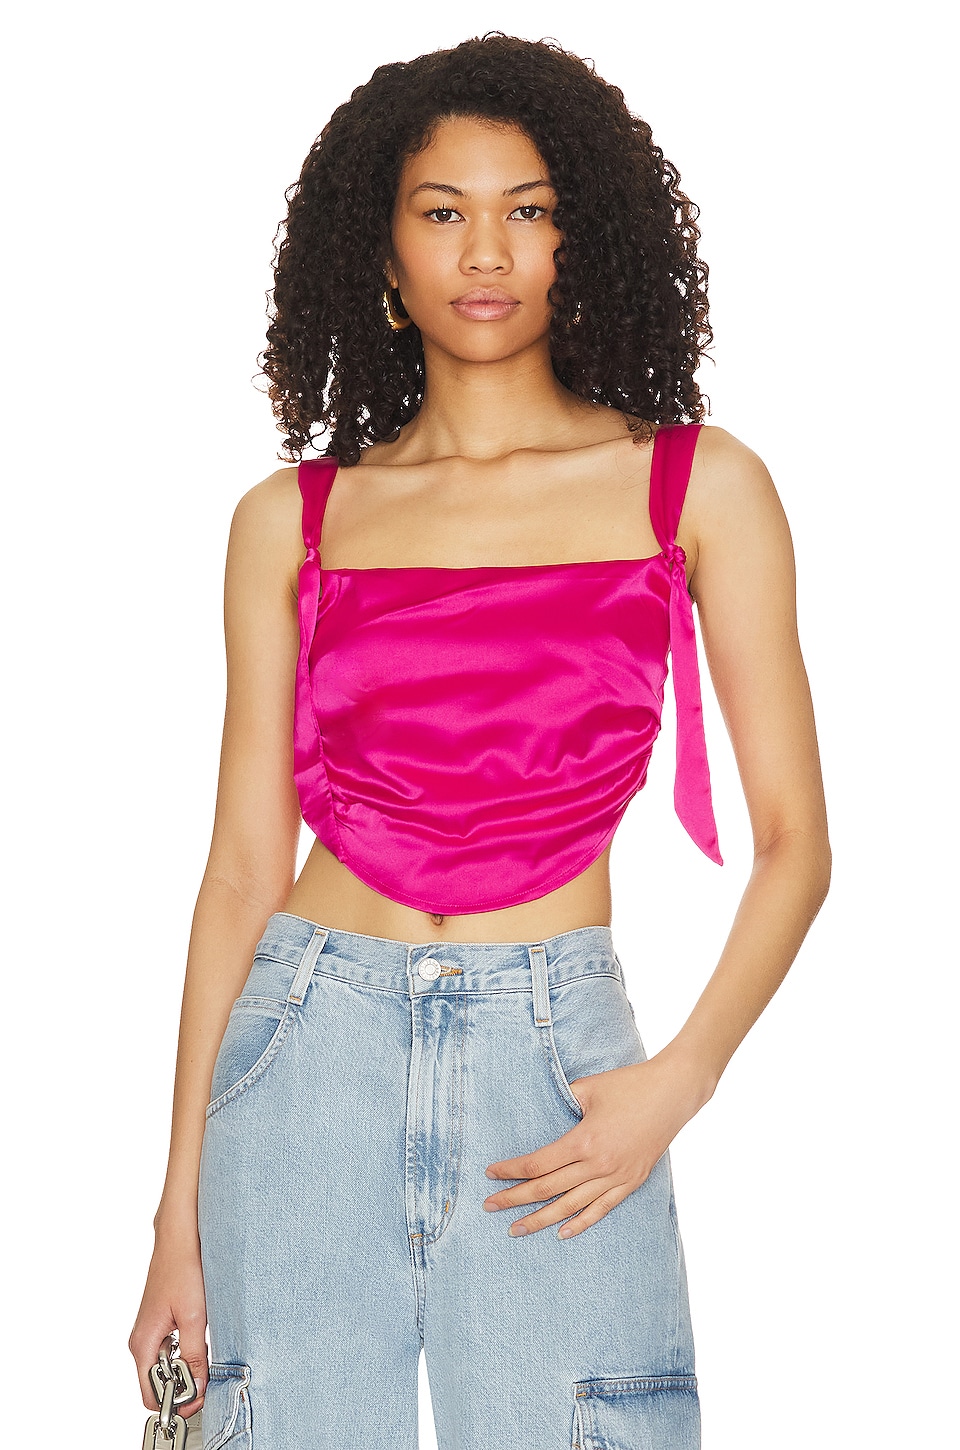 Топ MORE TO COME Gracie Bustier, цвет Hot Pink топ more to come petra цвет white palm